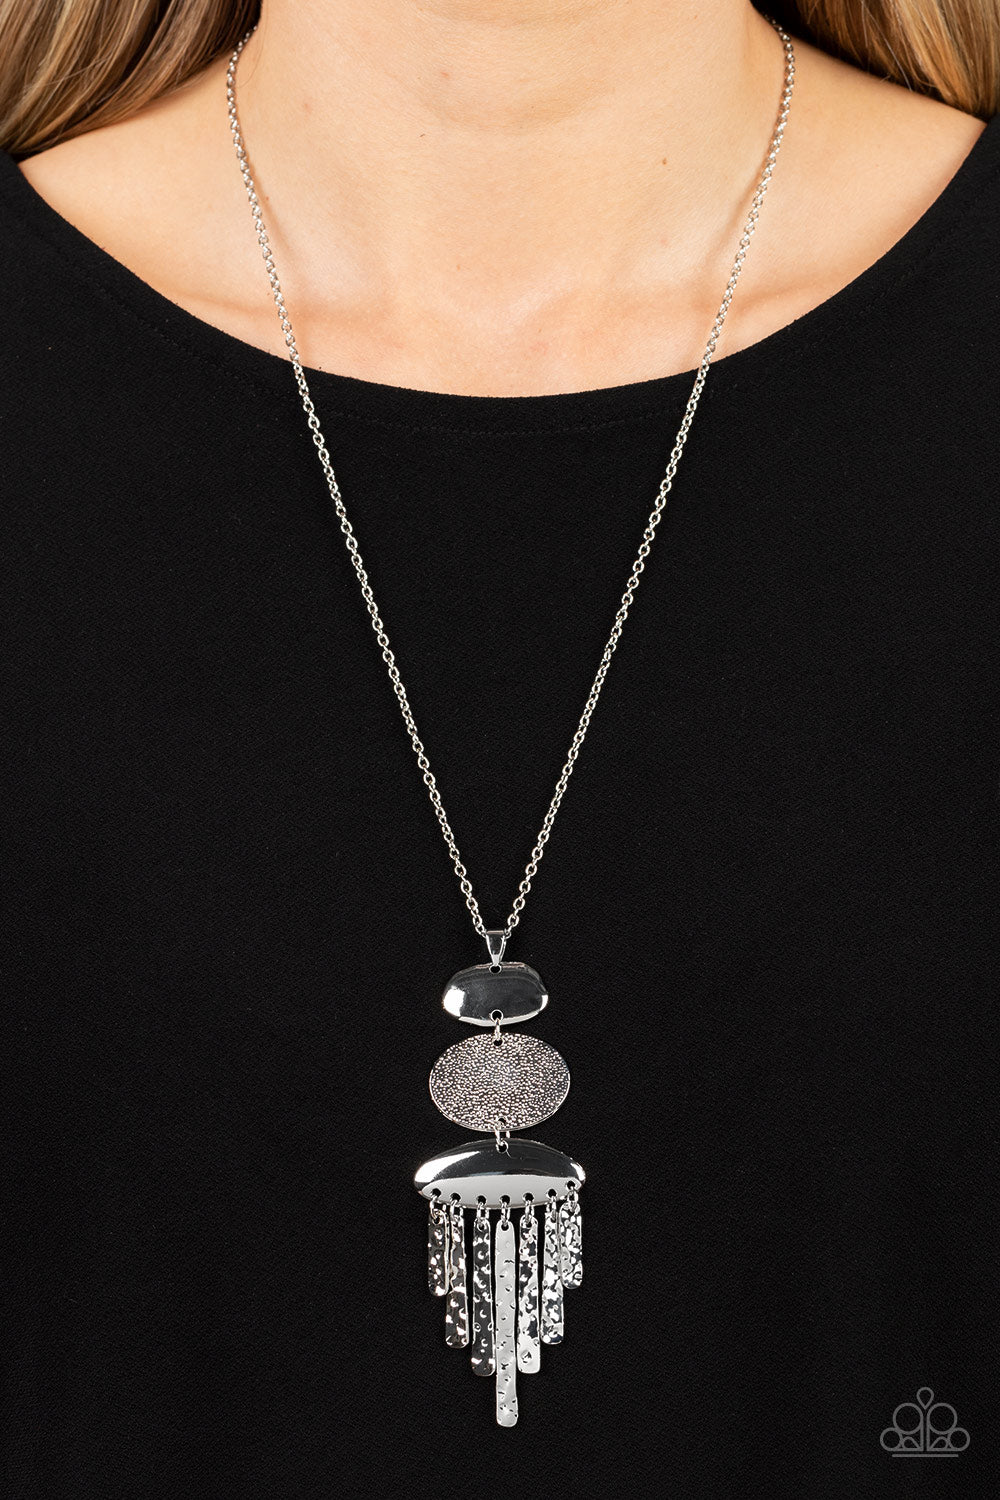 After the ARTIFACT - Silver Paparazzi Necklace